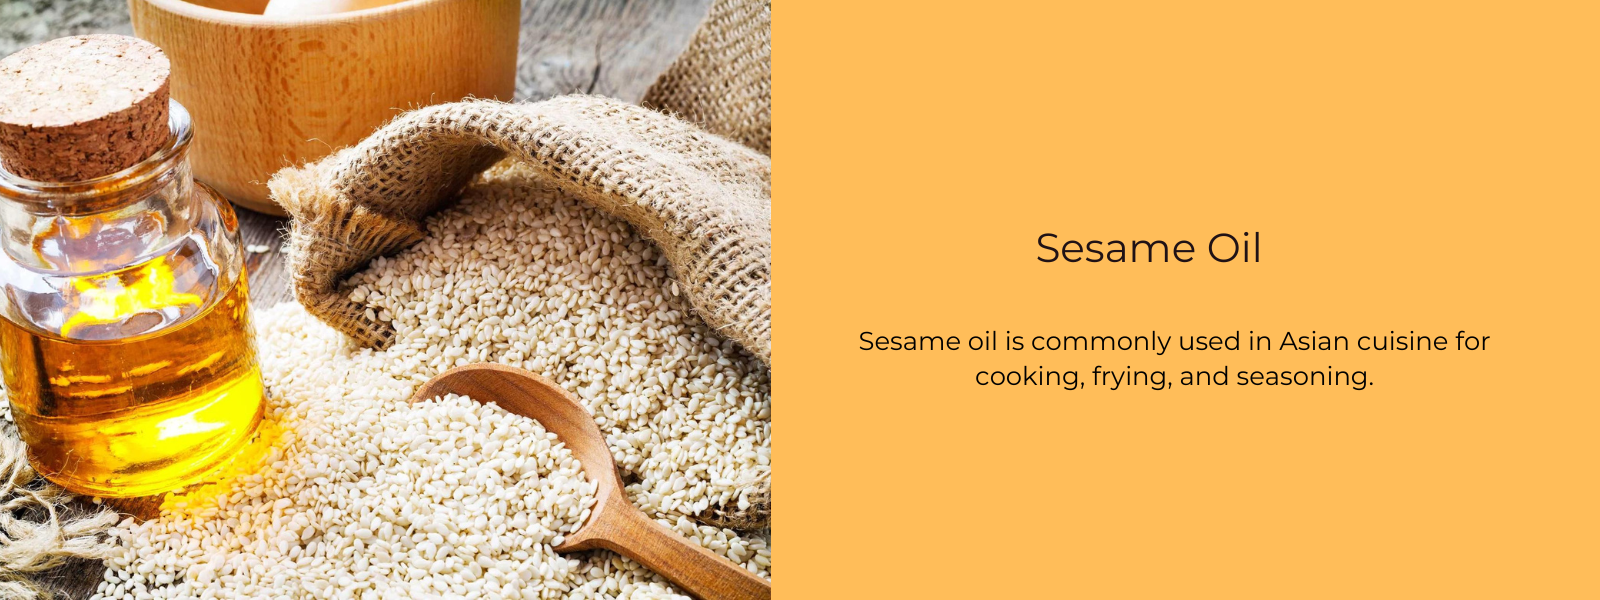 Sesame Oil - Health Benefits, Uses and Important Facts